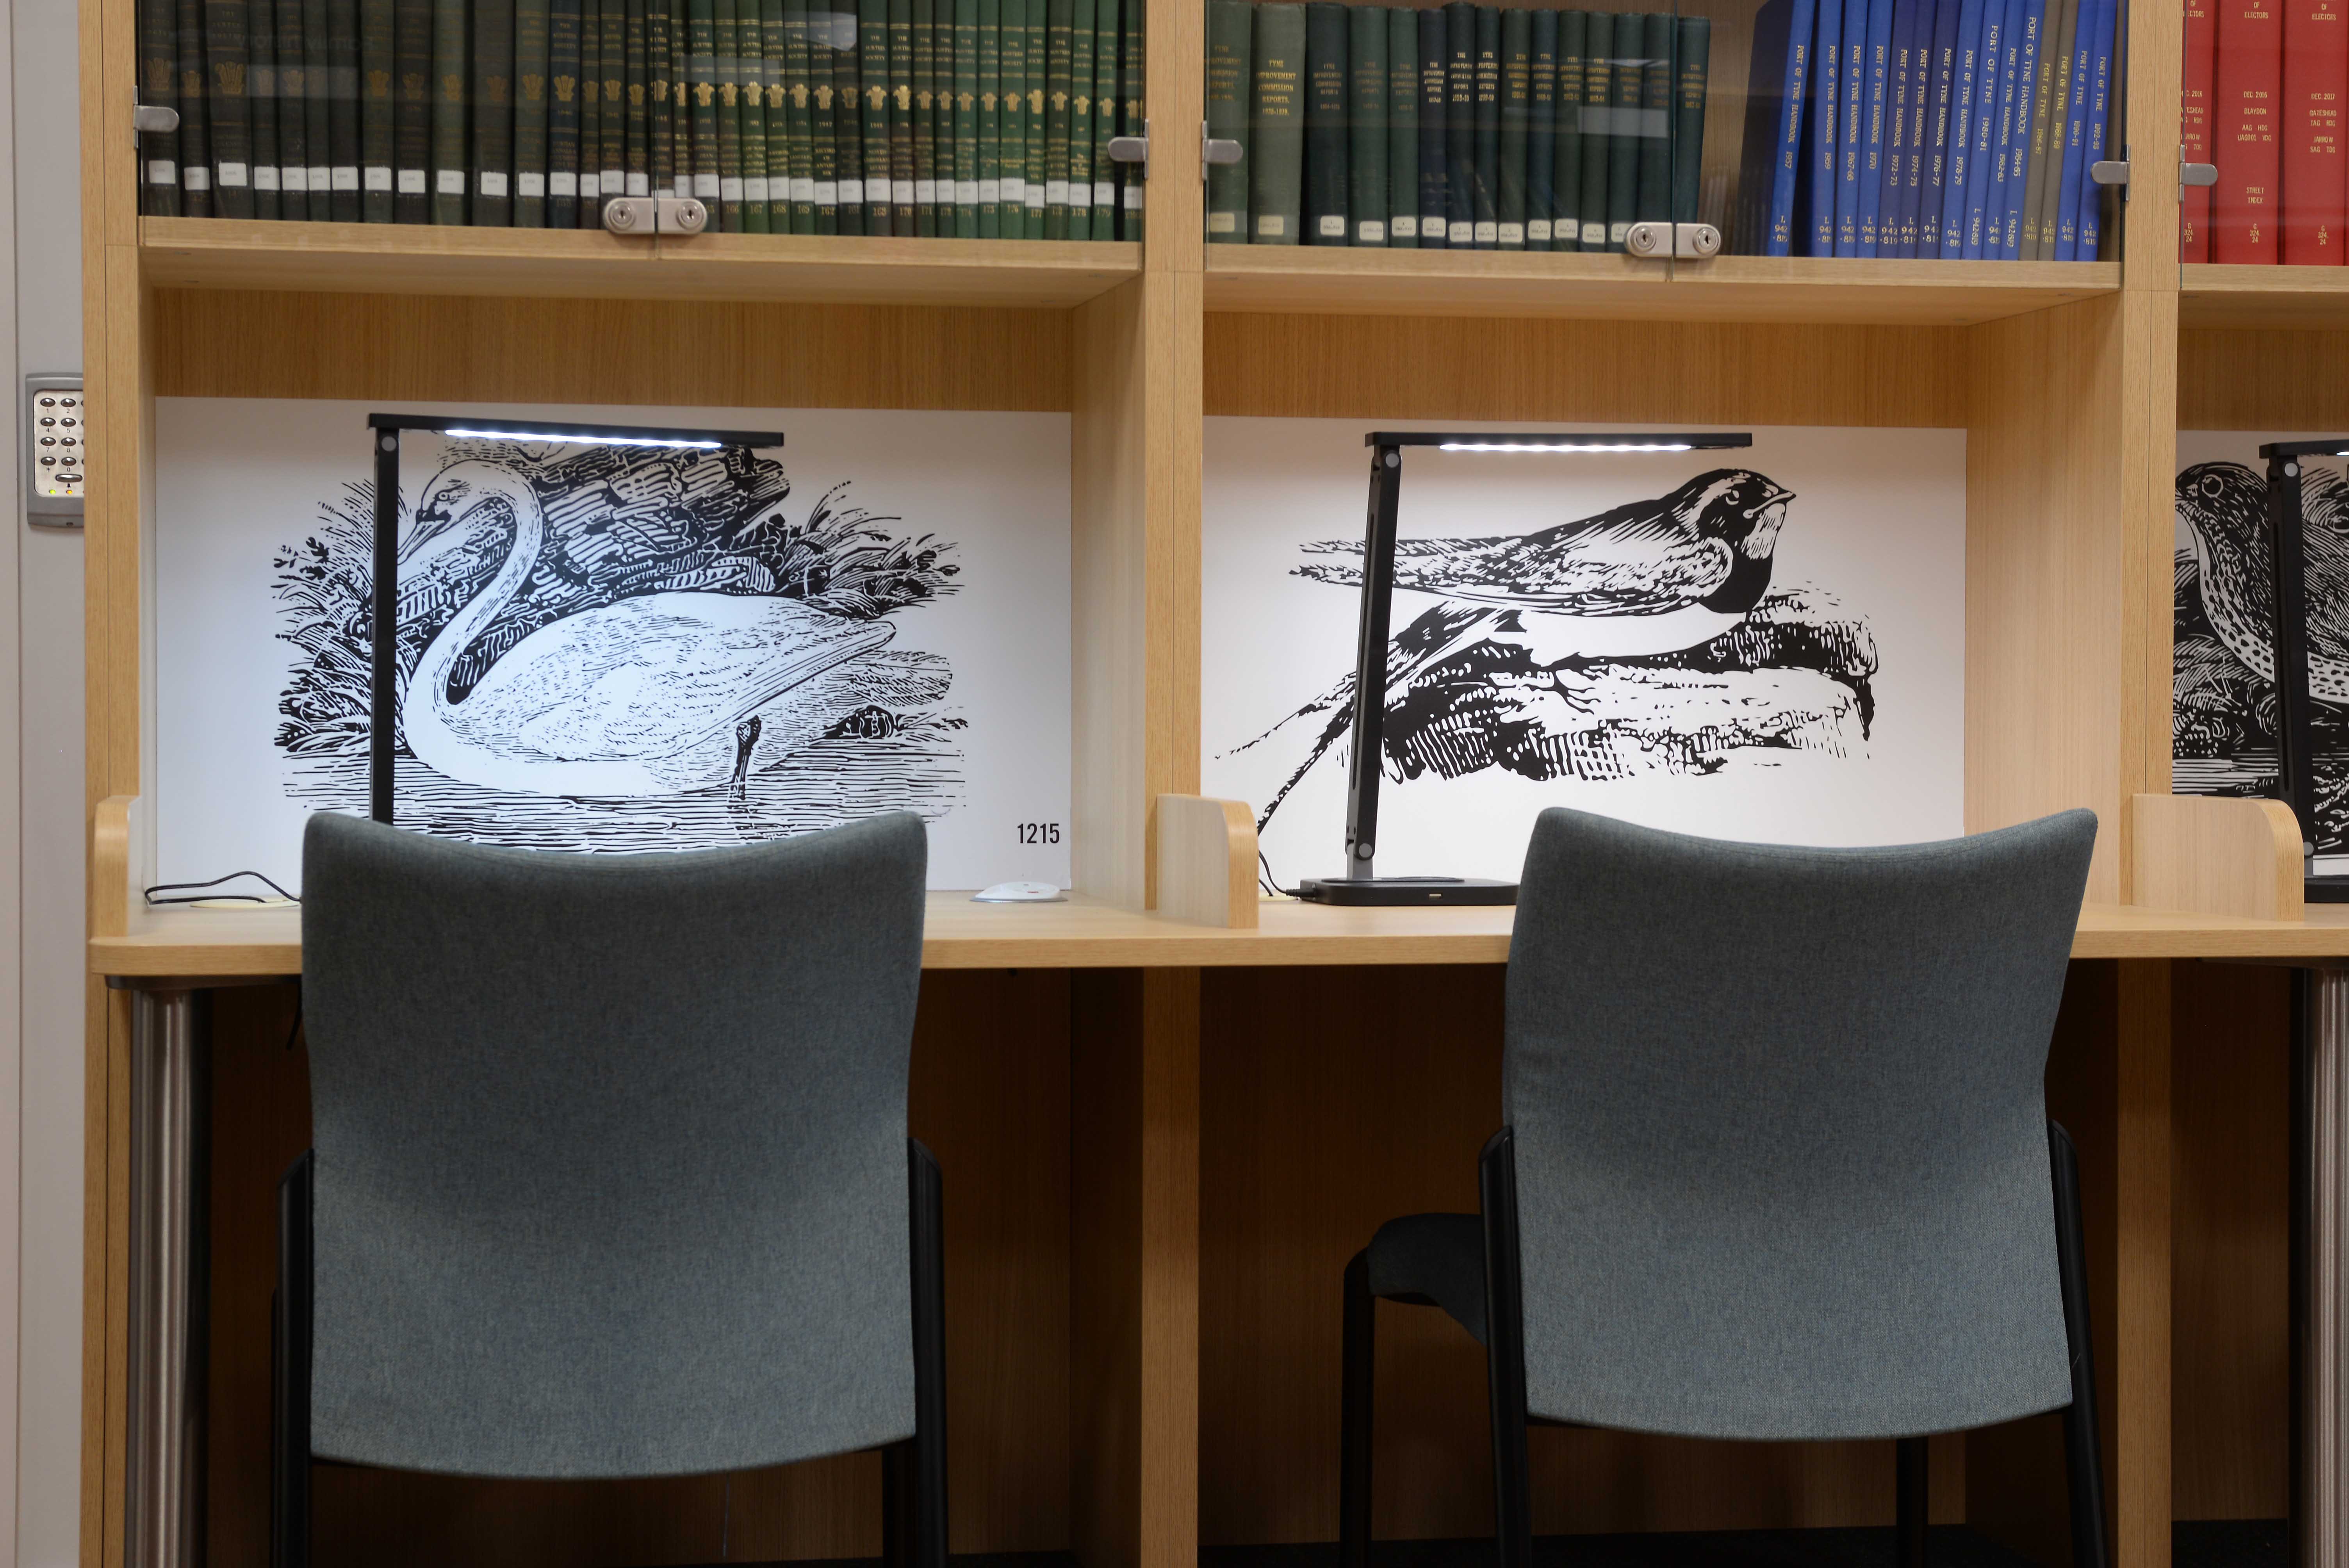 Engravings from the Archive’s Bewick Collection decorate rear panels of study desks